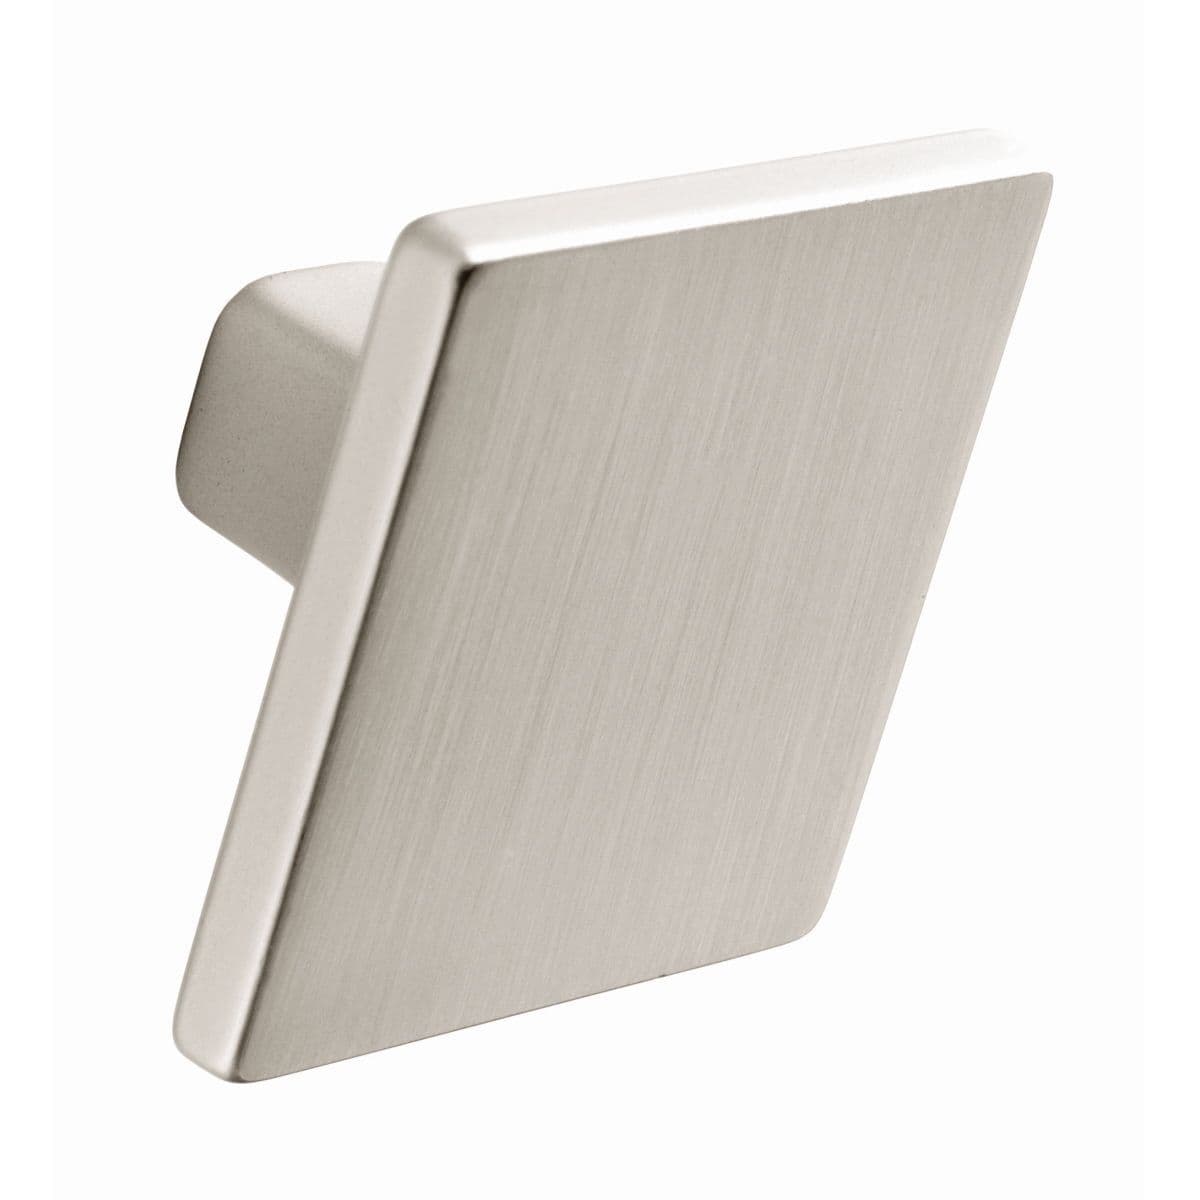 DALE SQUARE KNOB Cupboard Handle - 35mm x 35mm - 2 finishes (PWS K557.35)